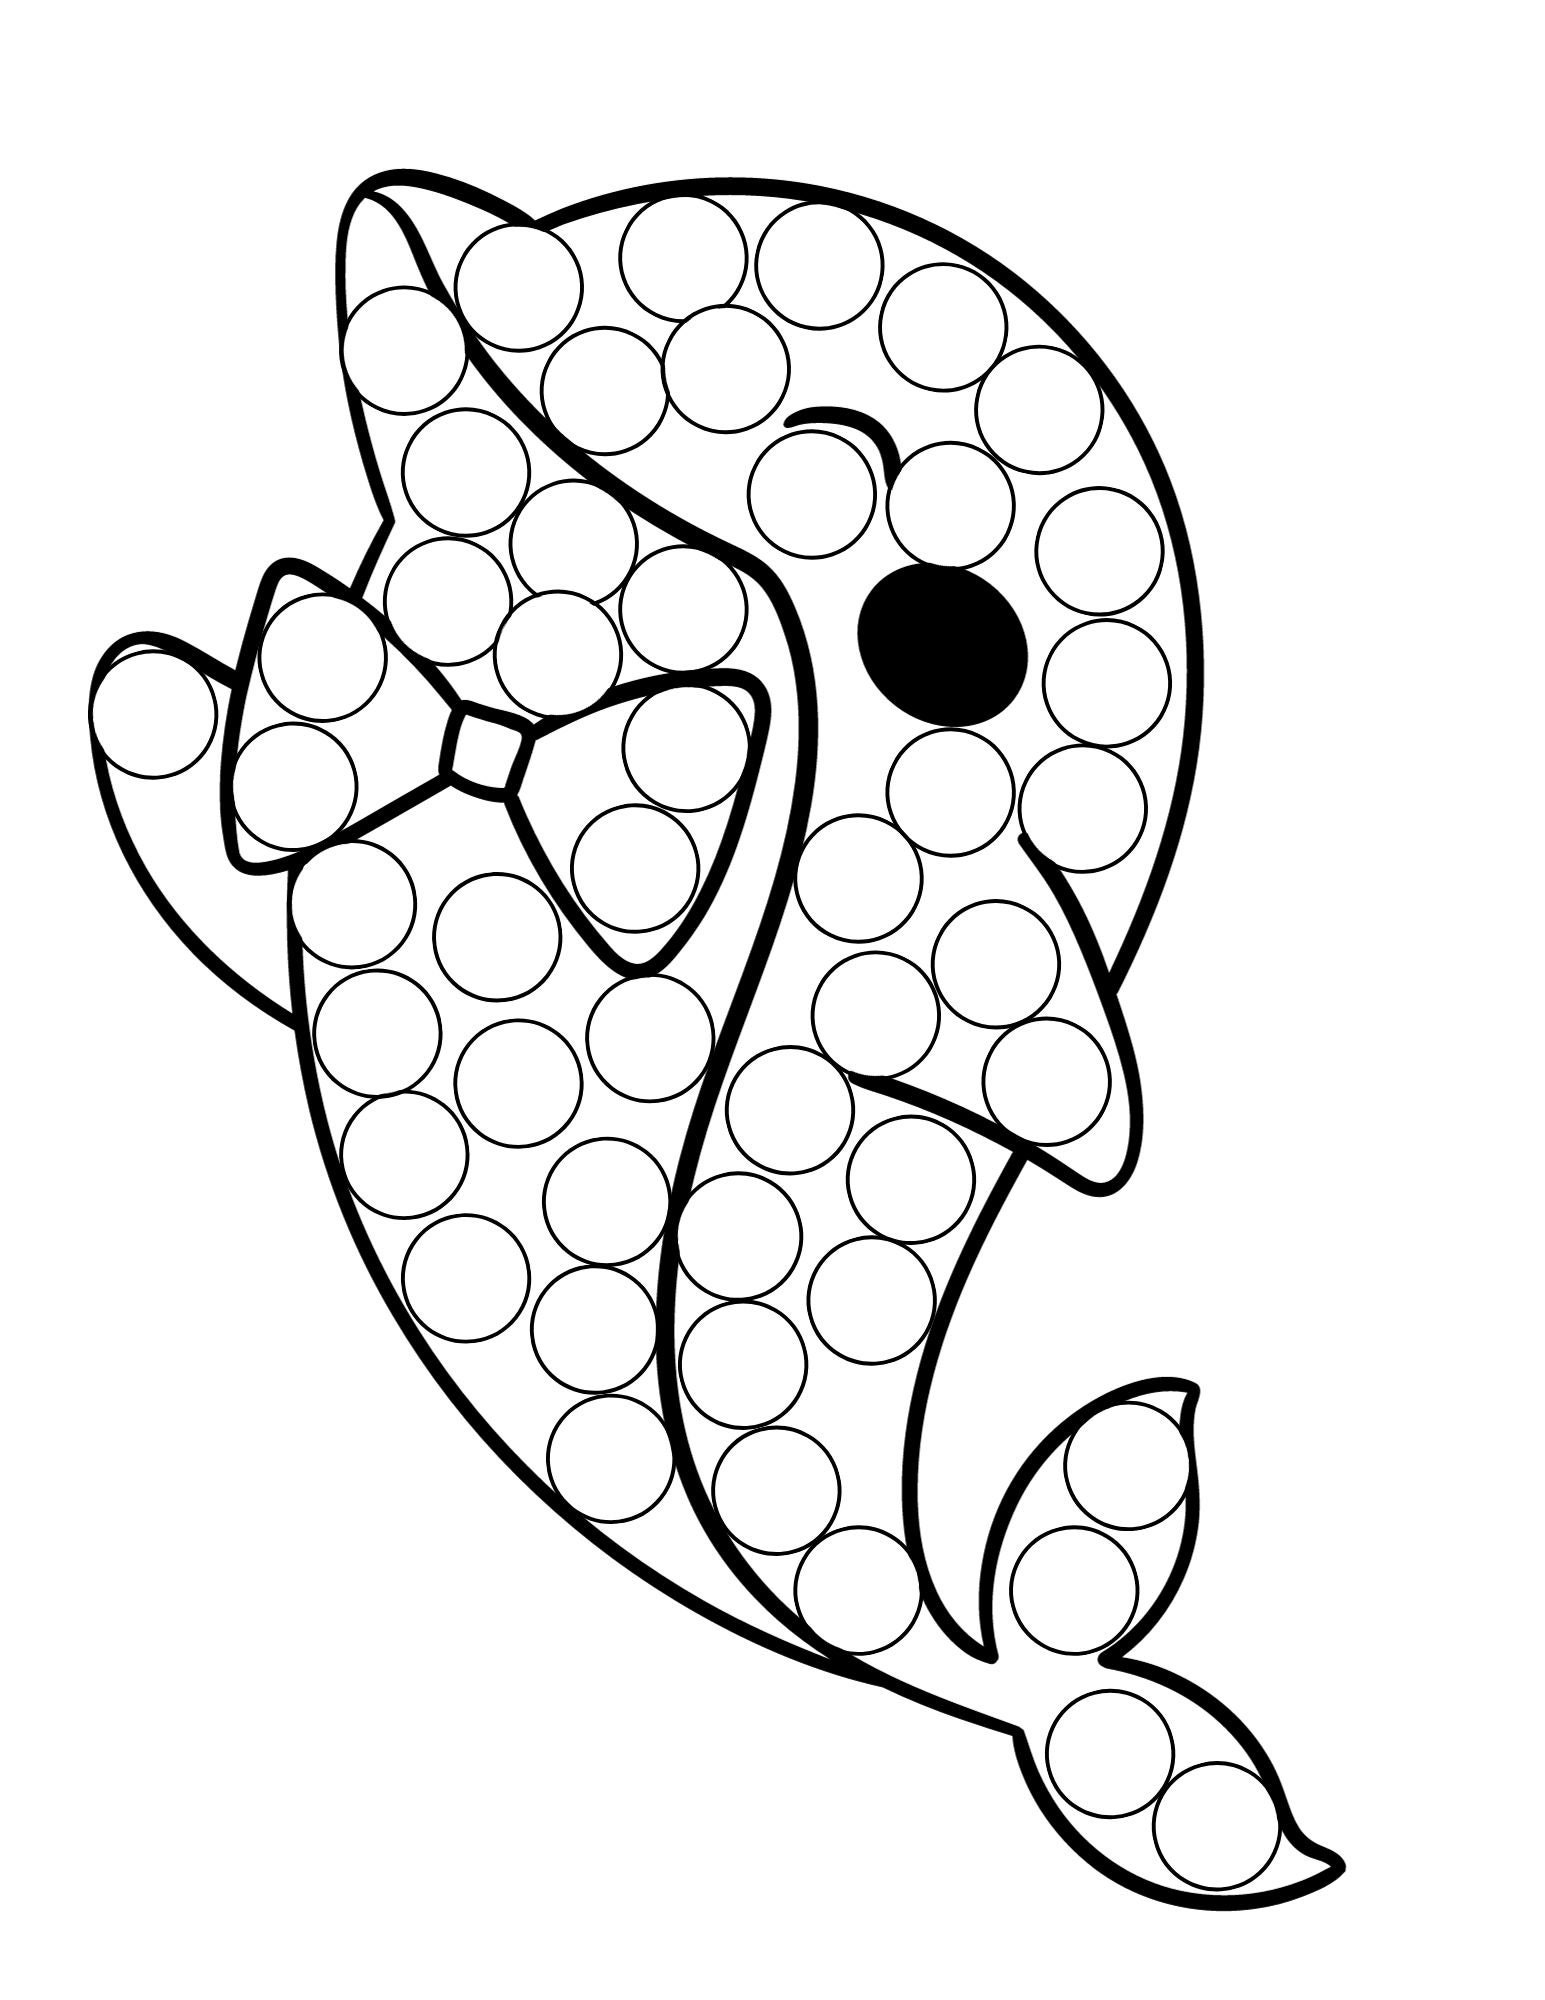 Animals Dot Marker Coloring Pages, Animals Dot Marker Printables ...